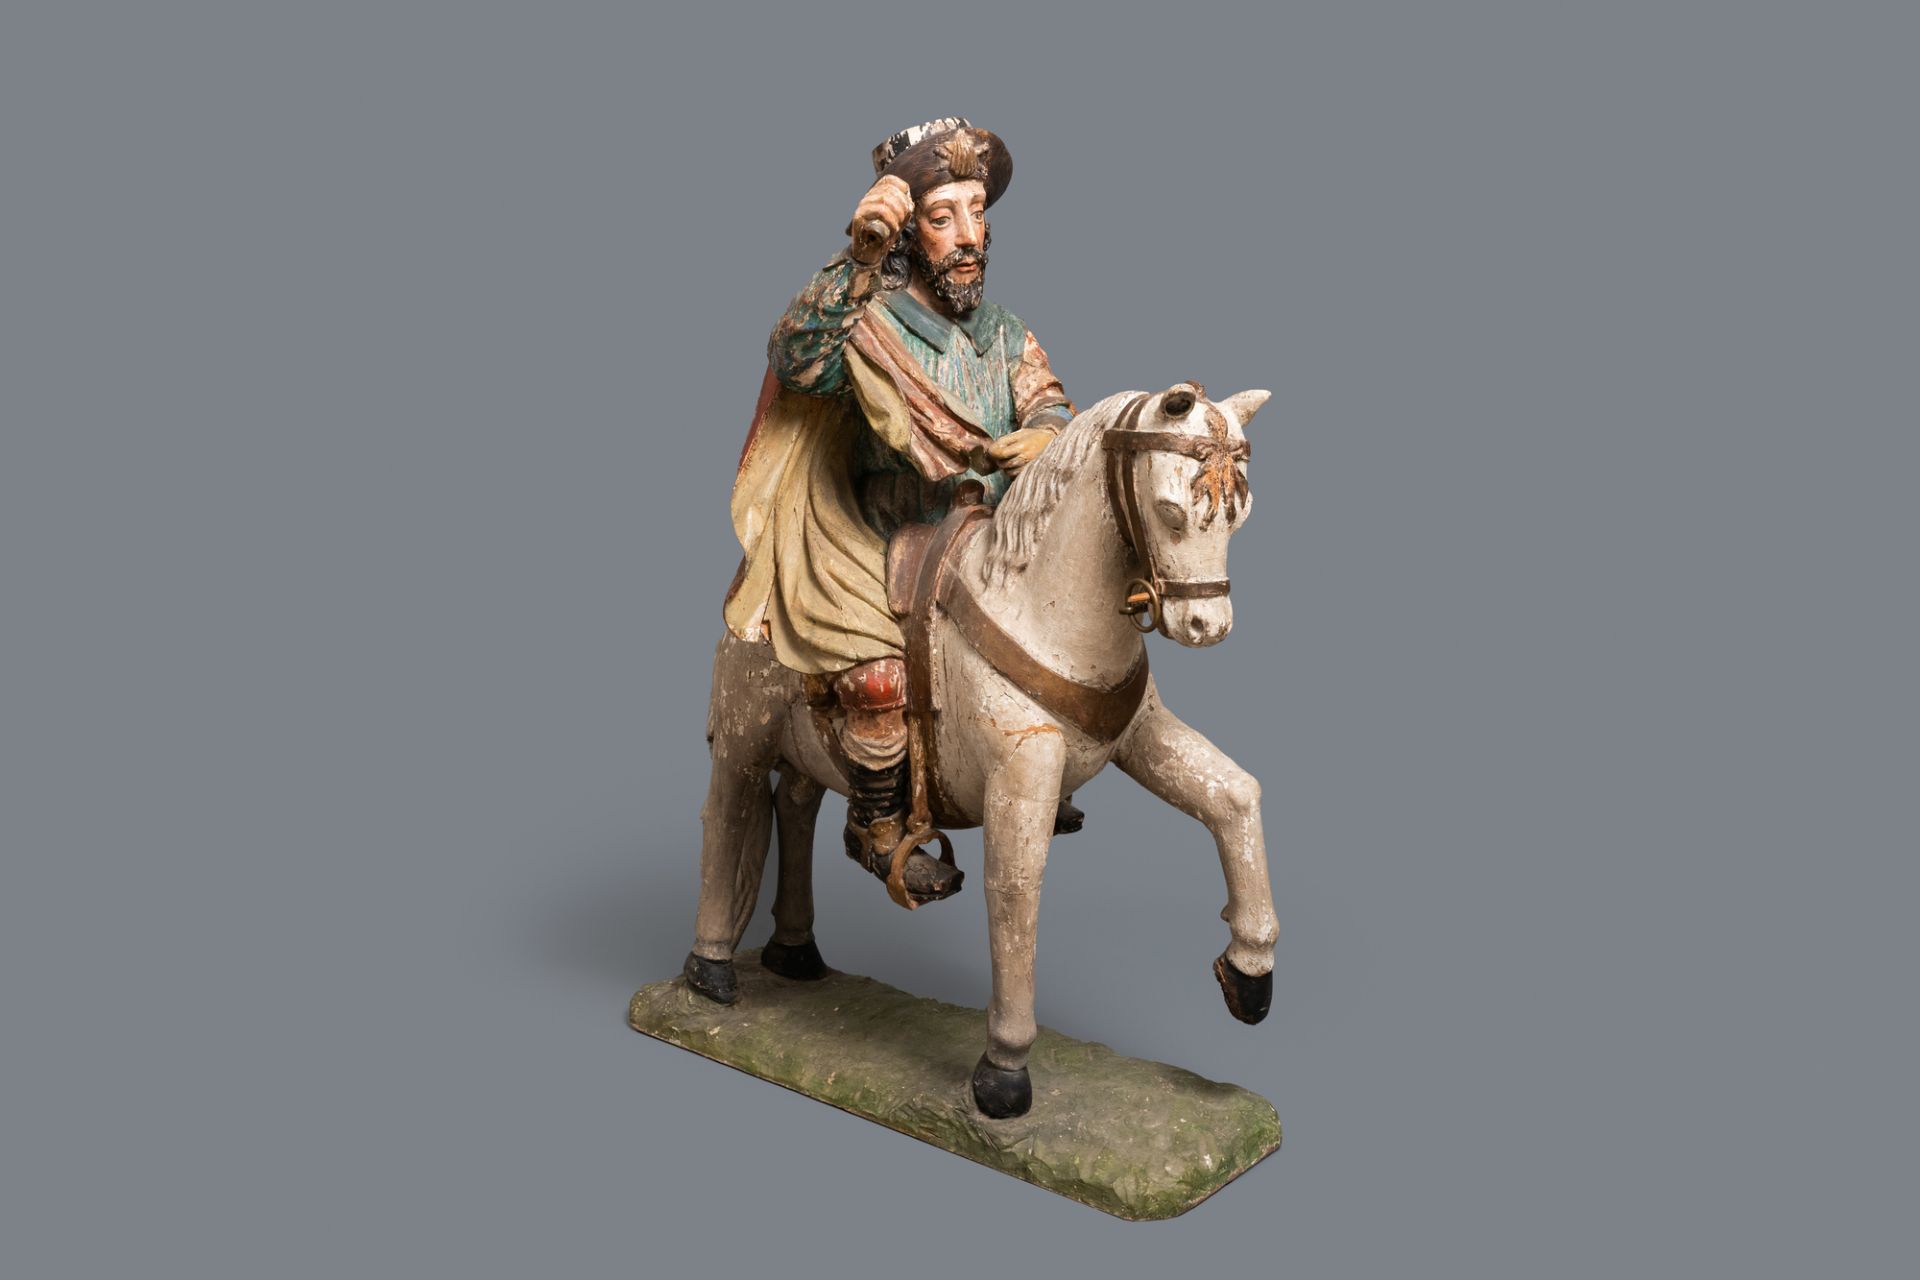 A large polychromed wooden group with Saint James of Compostela on horseback, Spain, 16th C.